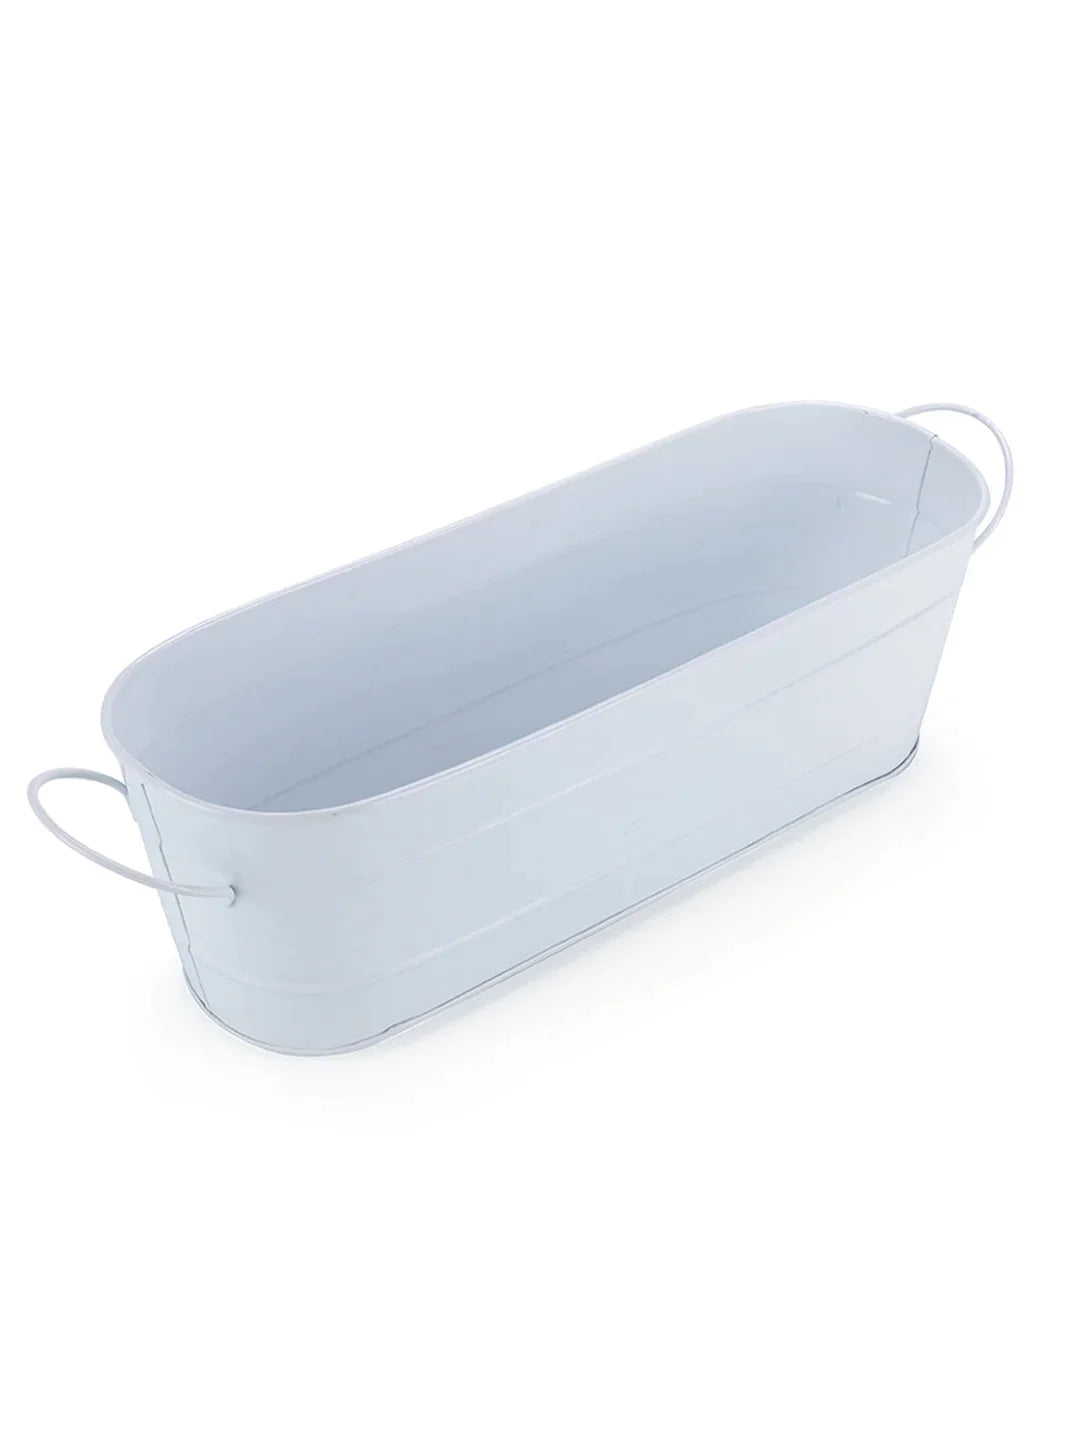 Oval Planter Large White 16 Inches